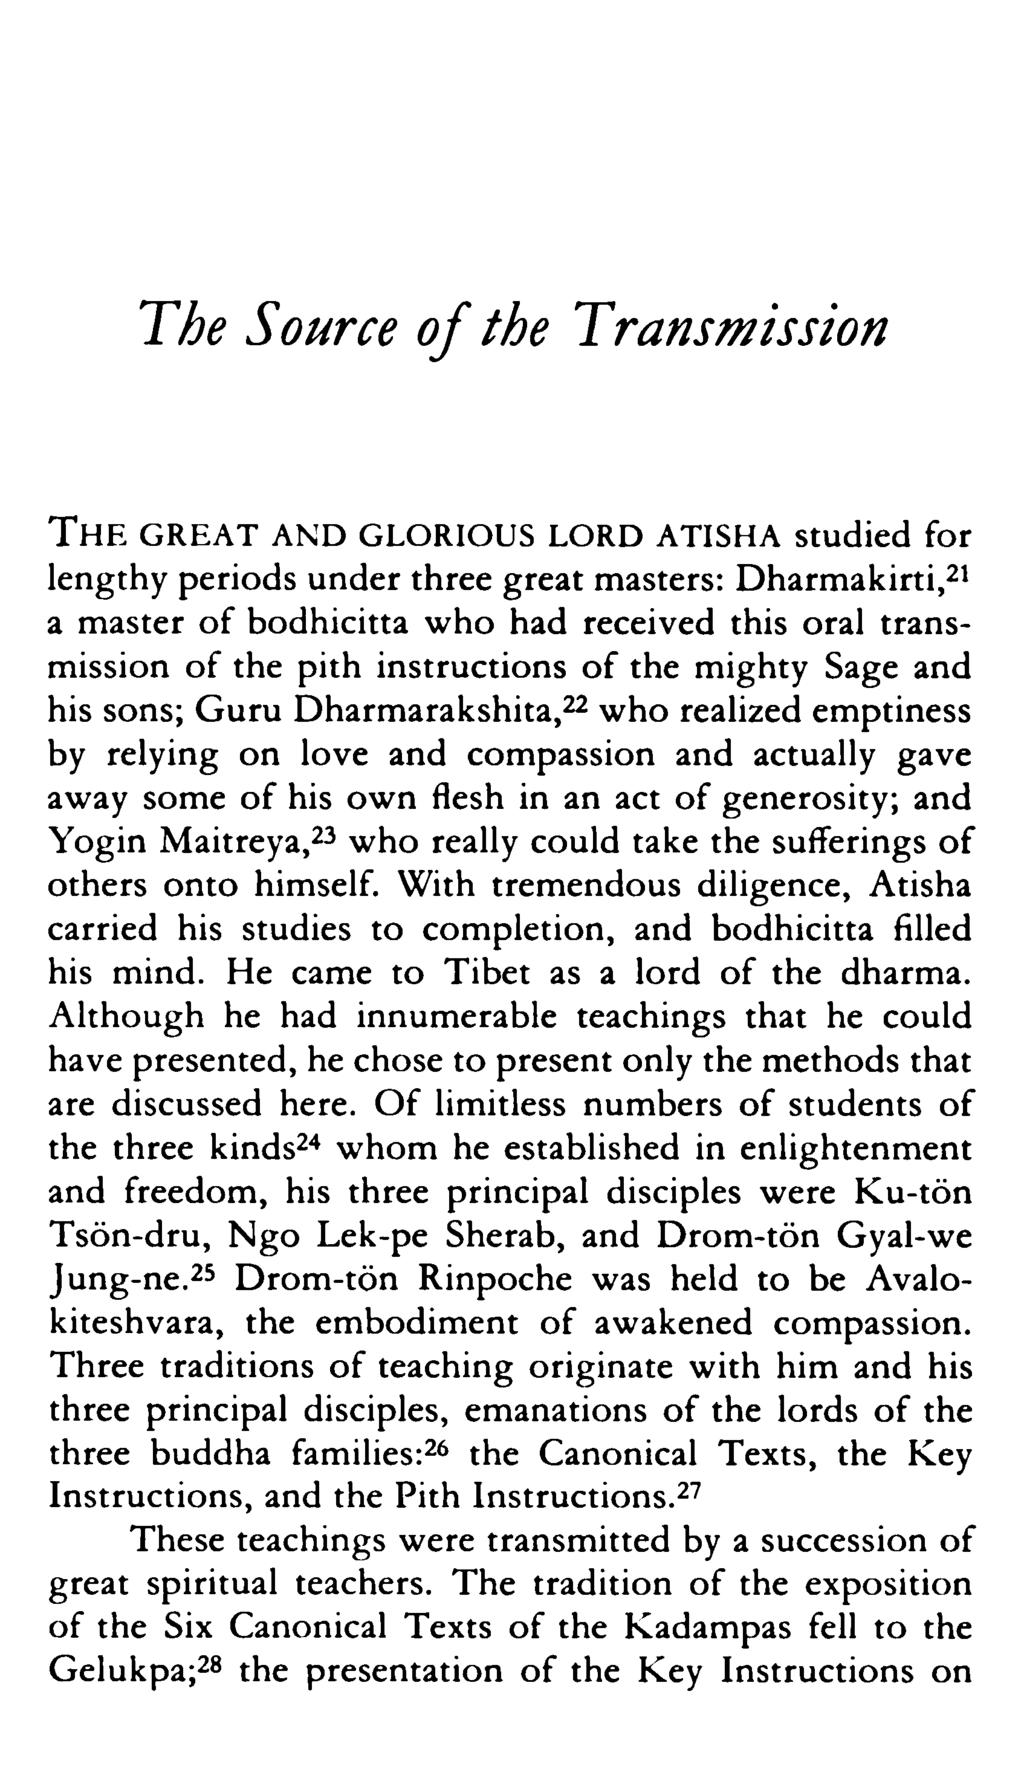 The Source of the Transmission THE GREAT AND GLORIOUS LORD A TISHA studied for lengthy periods under three great masters: Dharmakirti,21 a master of bodhicitta who had received this oral transmission